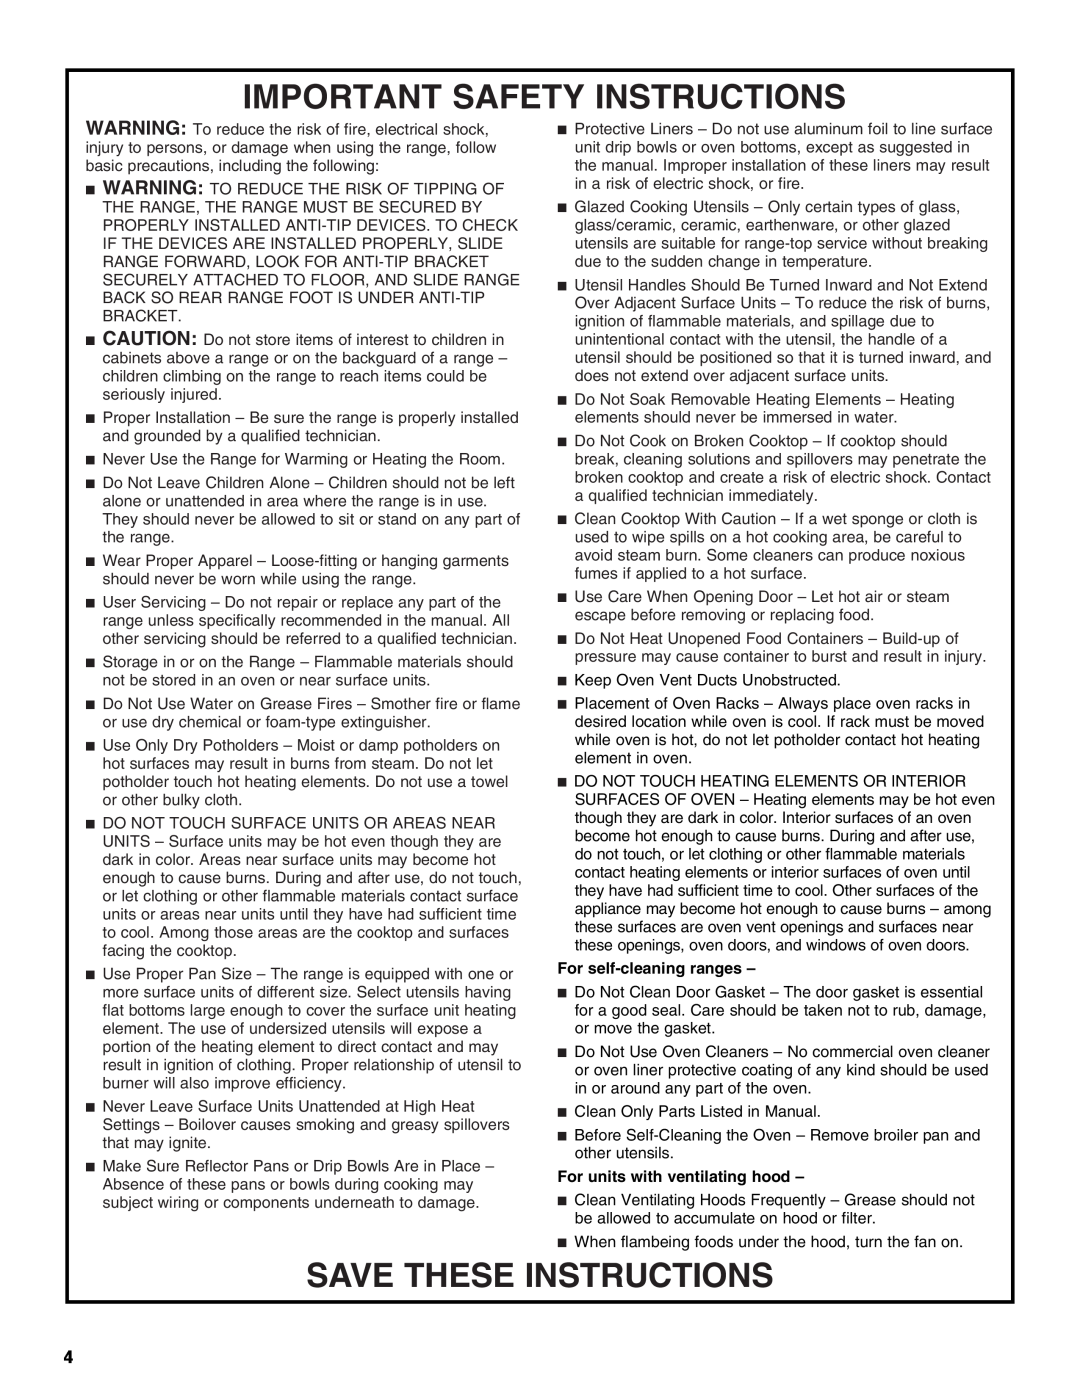 Whirlpool W10017750B2 manual Important Safety Instructions, Save These Instructions, For self-cleaningranges 